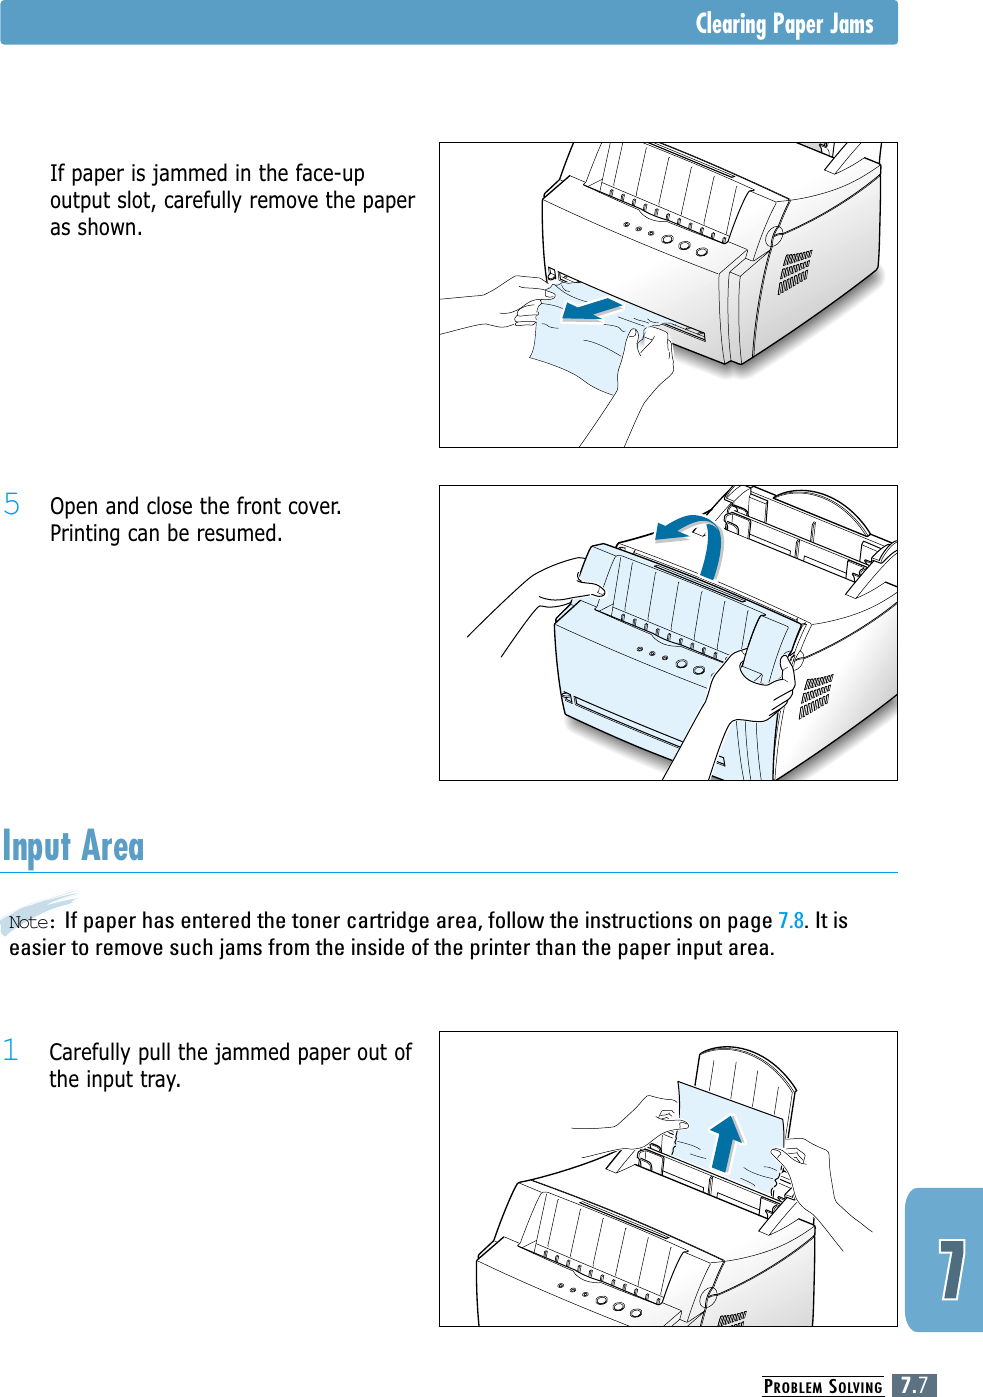 PROBLEM SOLVING7.7Note: If paper has entered the toner cartridge area, follow the instructions on page 7.8. It iseasier to remove such jams from the inside of the printer than the paper input area.Input Area1 Carefully pull the jammed paper out ofthe input tray.5 Open and close the front cover.Printing can be resumed.5 If paper is jammed in the face-upoutput slot, carefully remove the paperas shown.Clearing Paper Jams